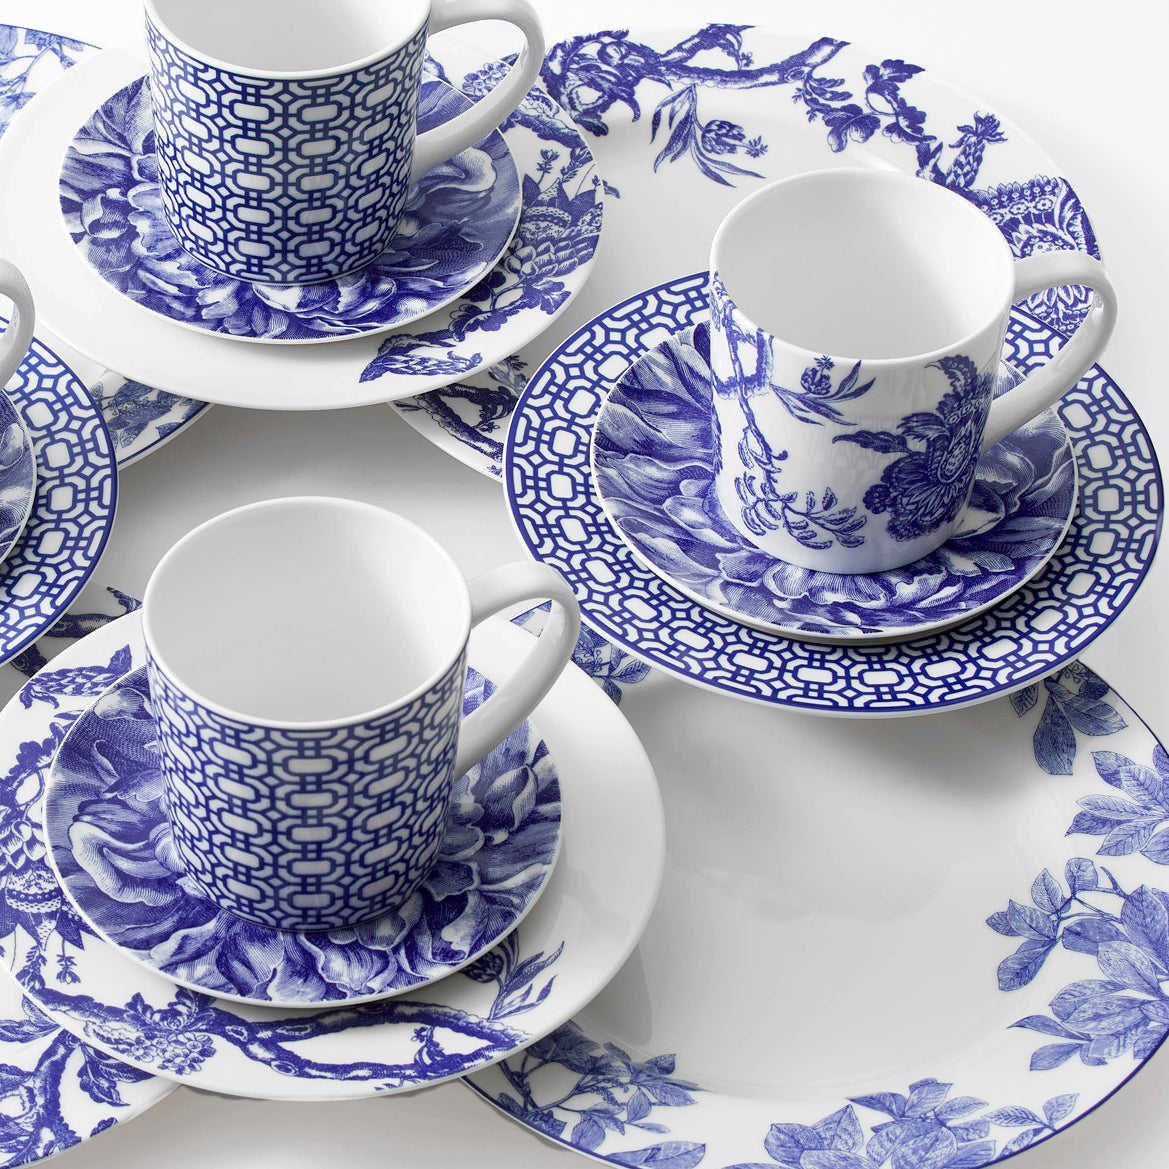 Romantic mixed botanical 16 piece dinnerware set in blue and white porcelain from Caskata.